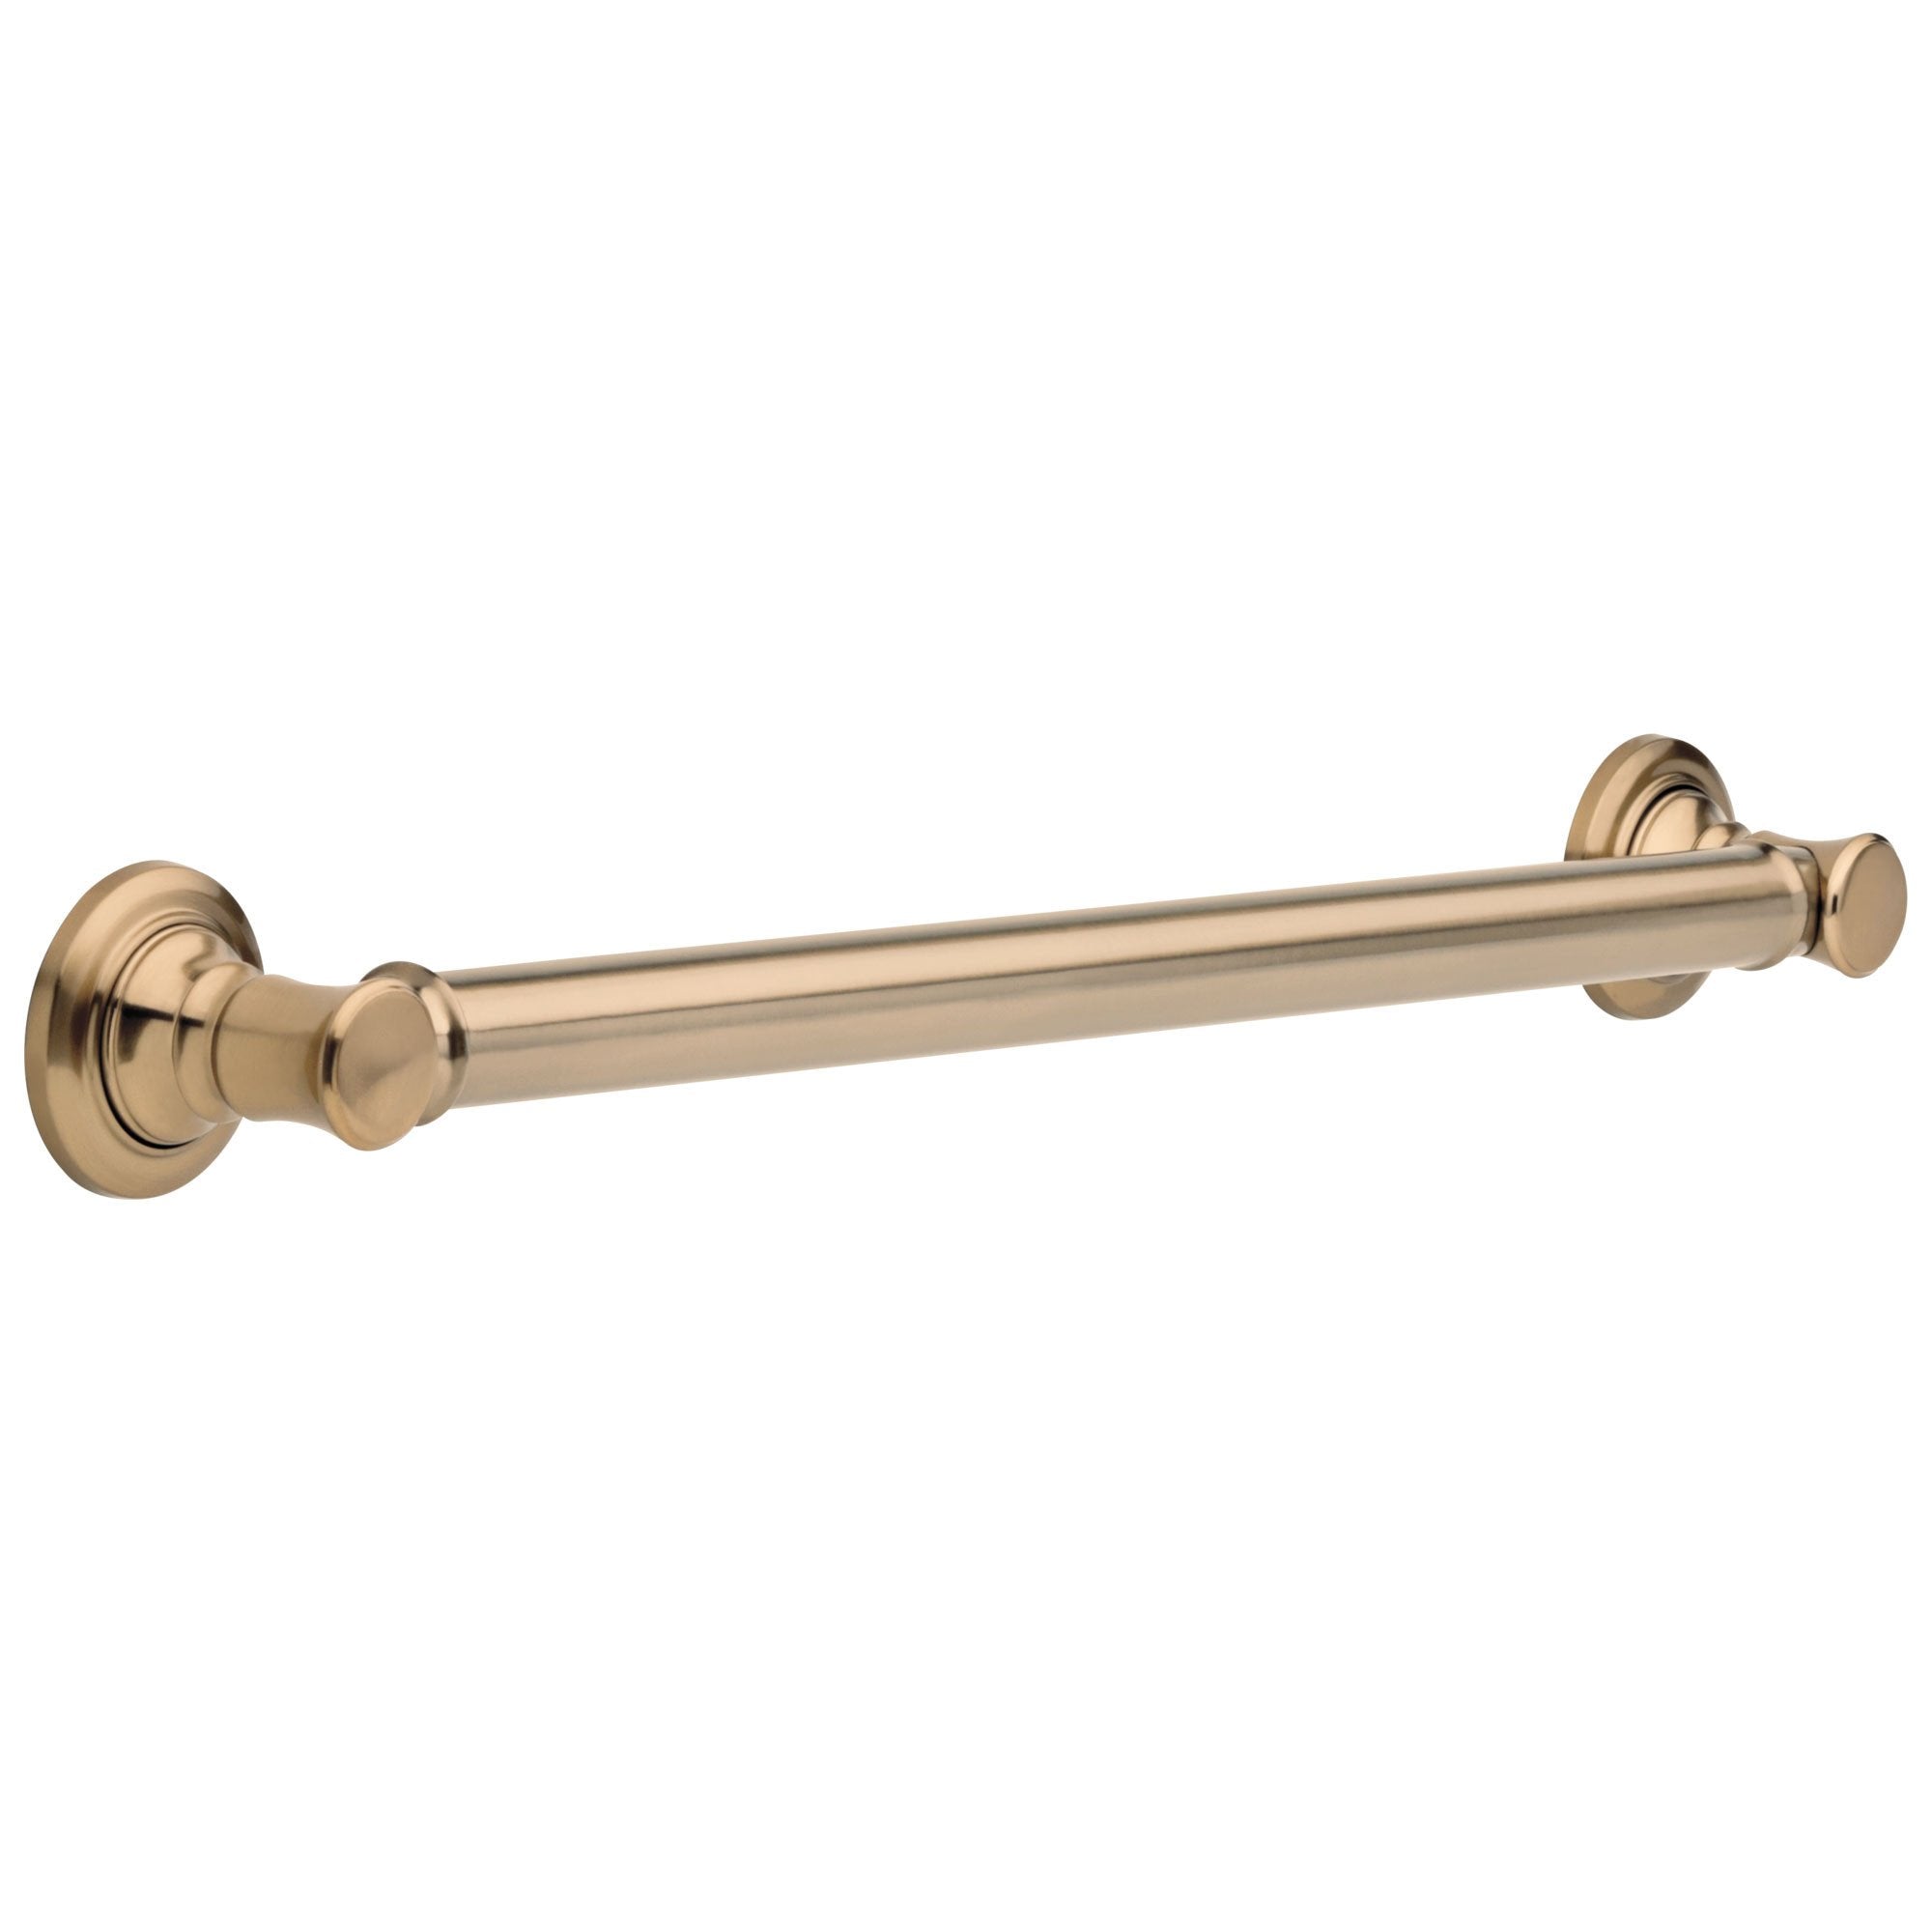 Delta Bath Safety Collection Champagne Bronze Finish Traditional Decorative Style Standard ADA Approved Grab Bar - 24" D41624CZ